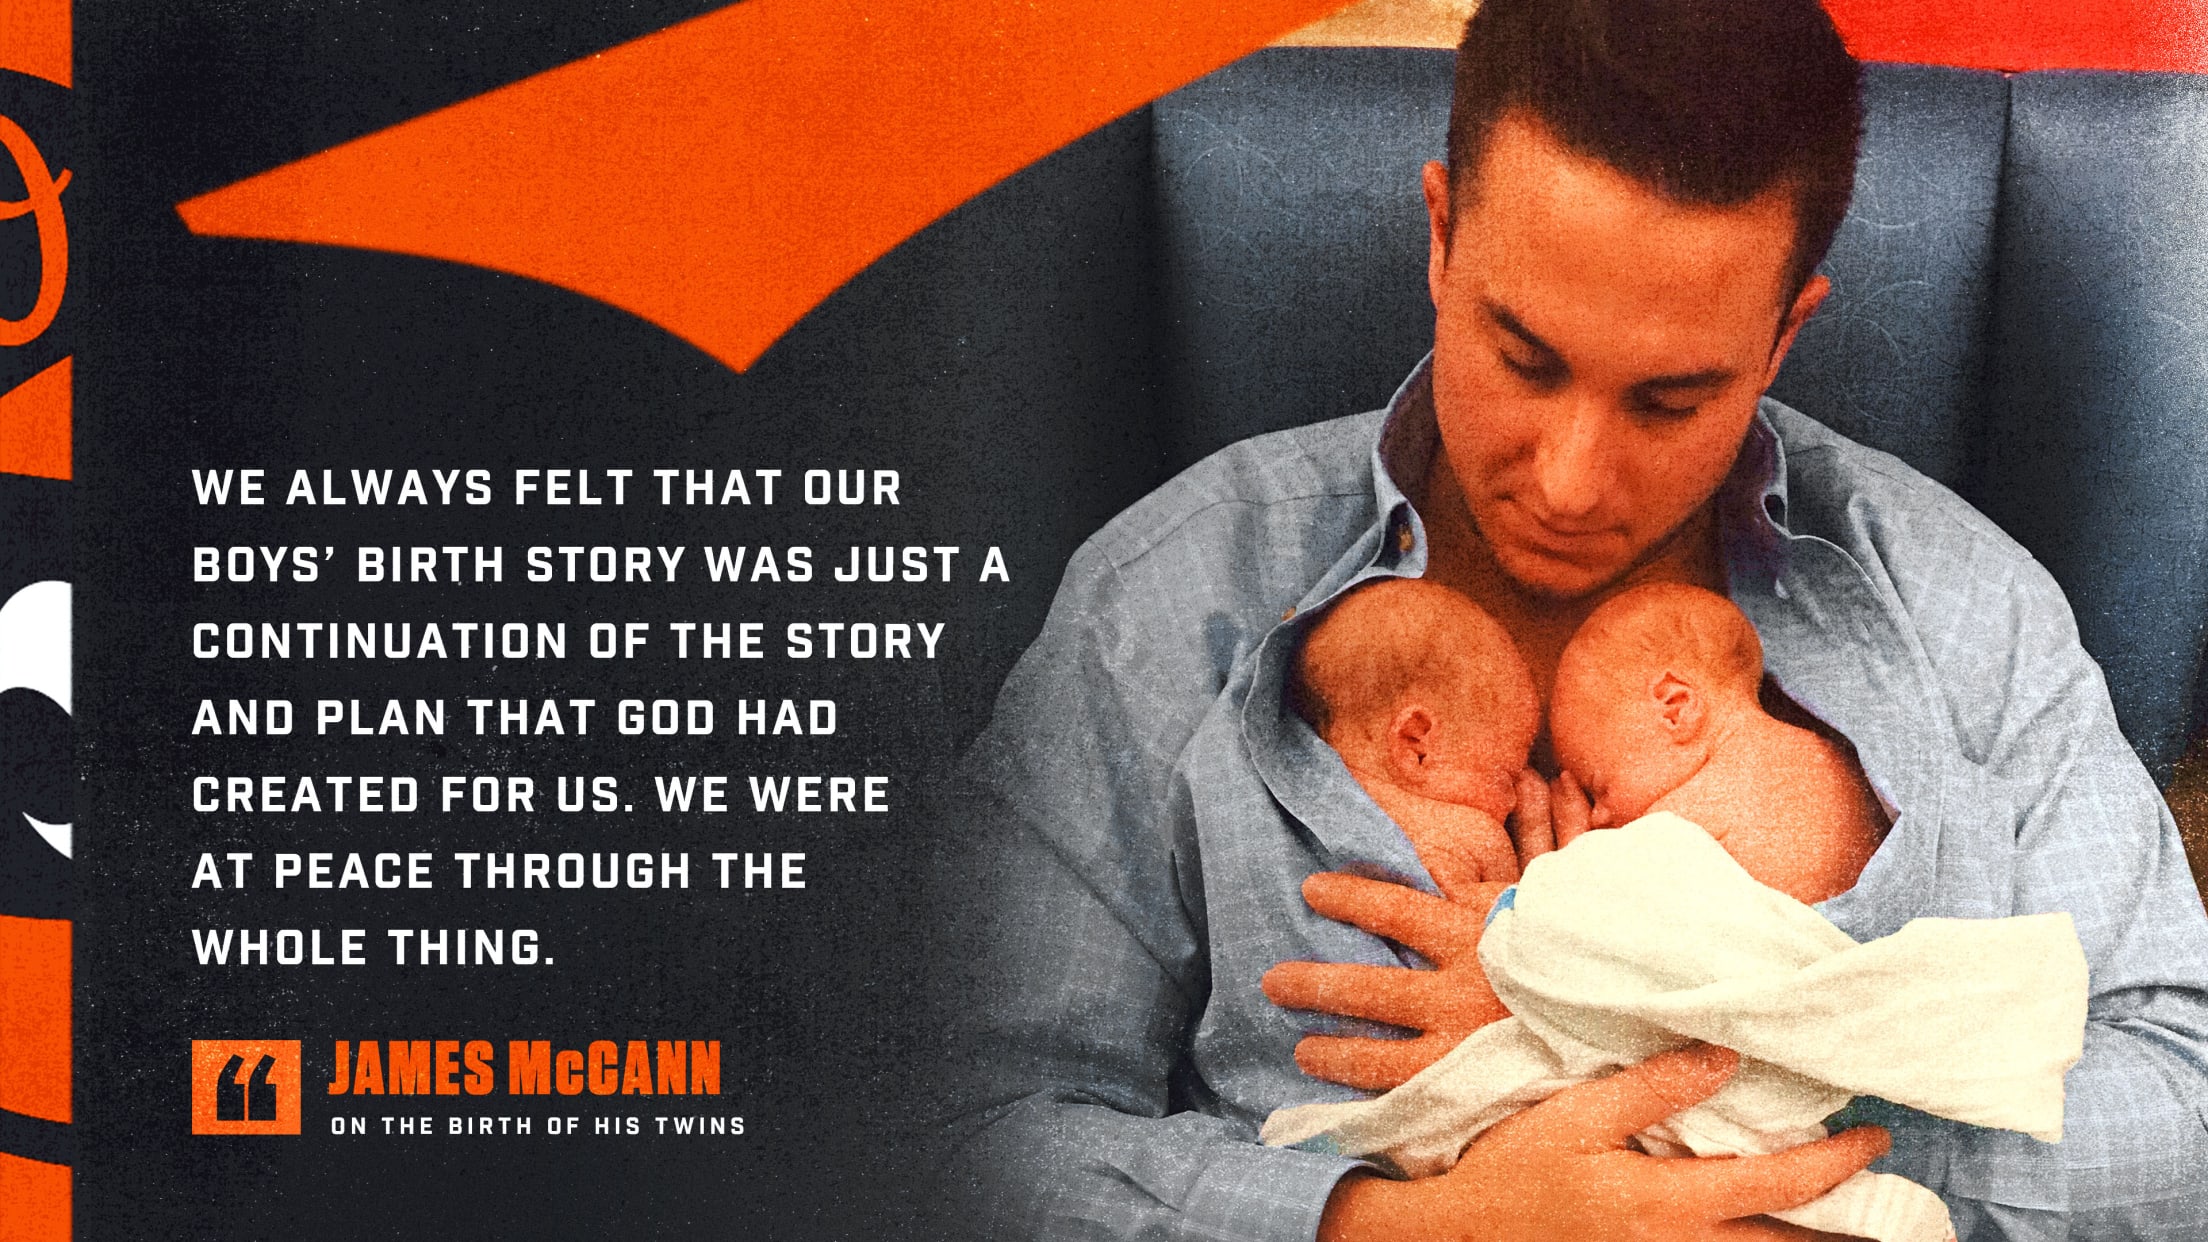 Orioles Community on X: James McCann and his family spent the